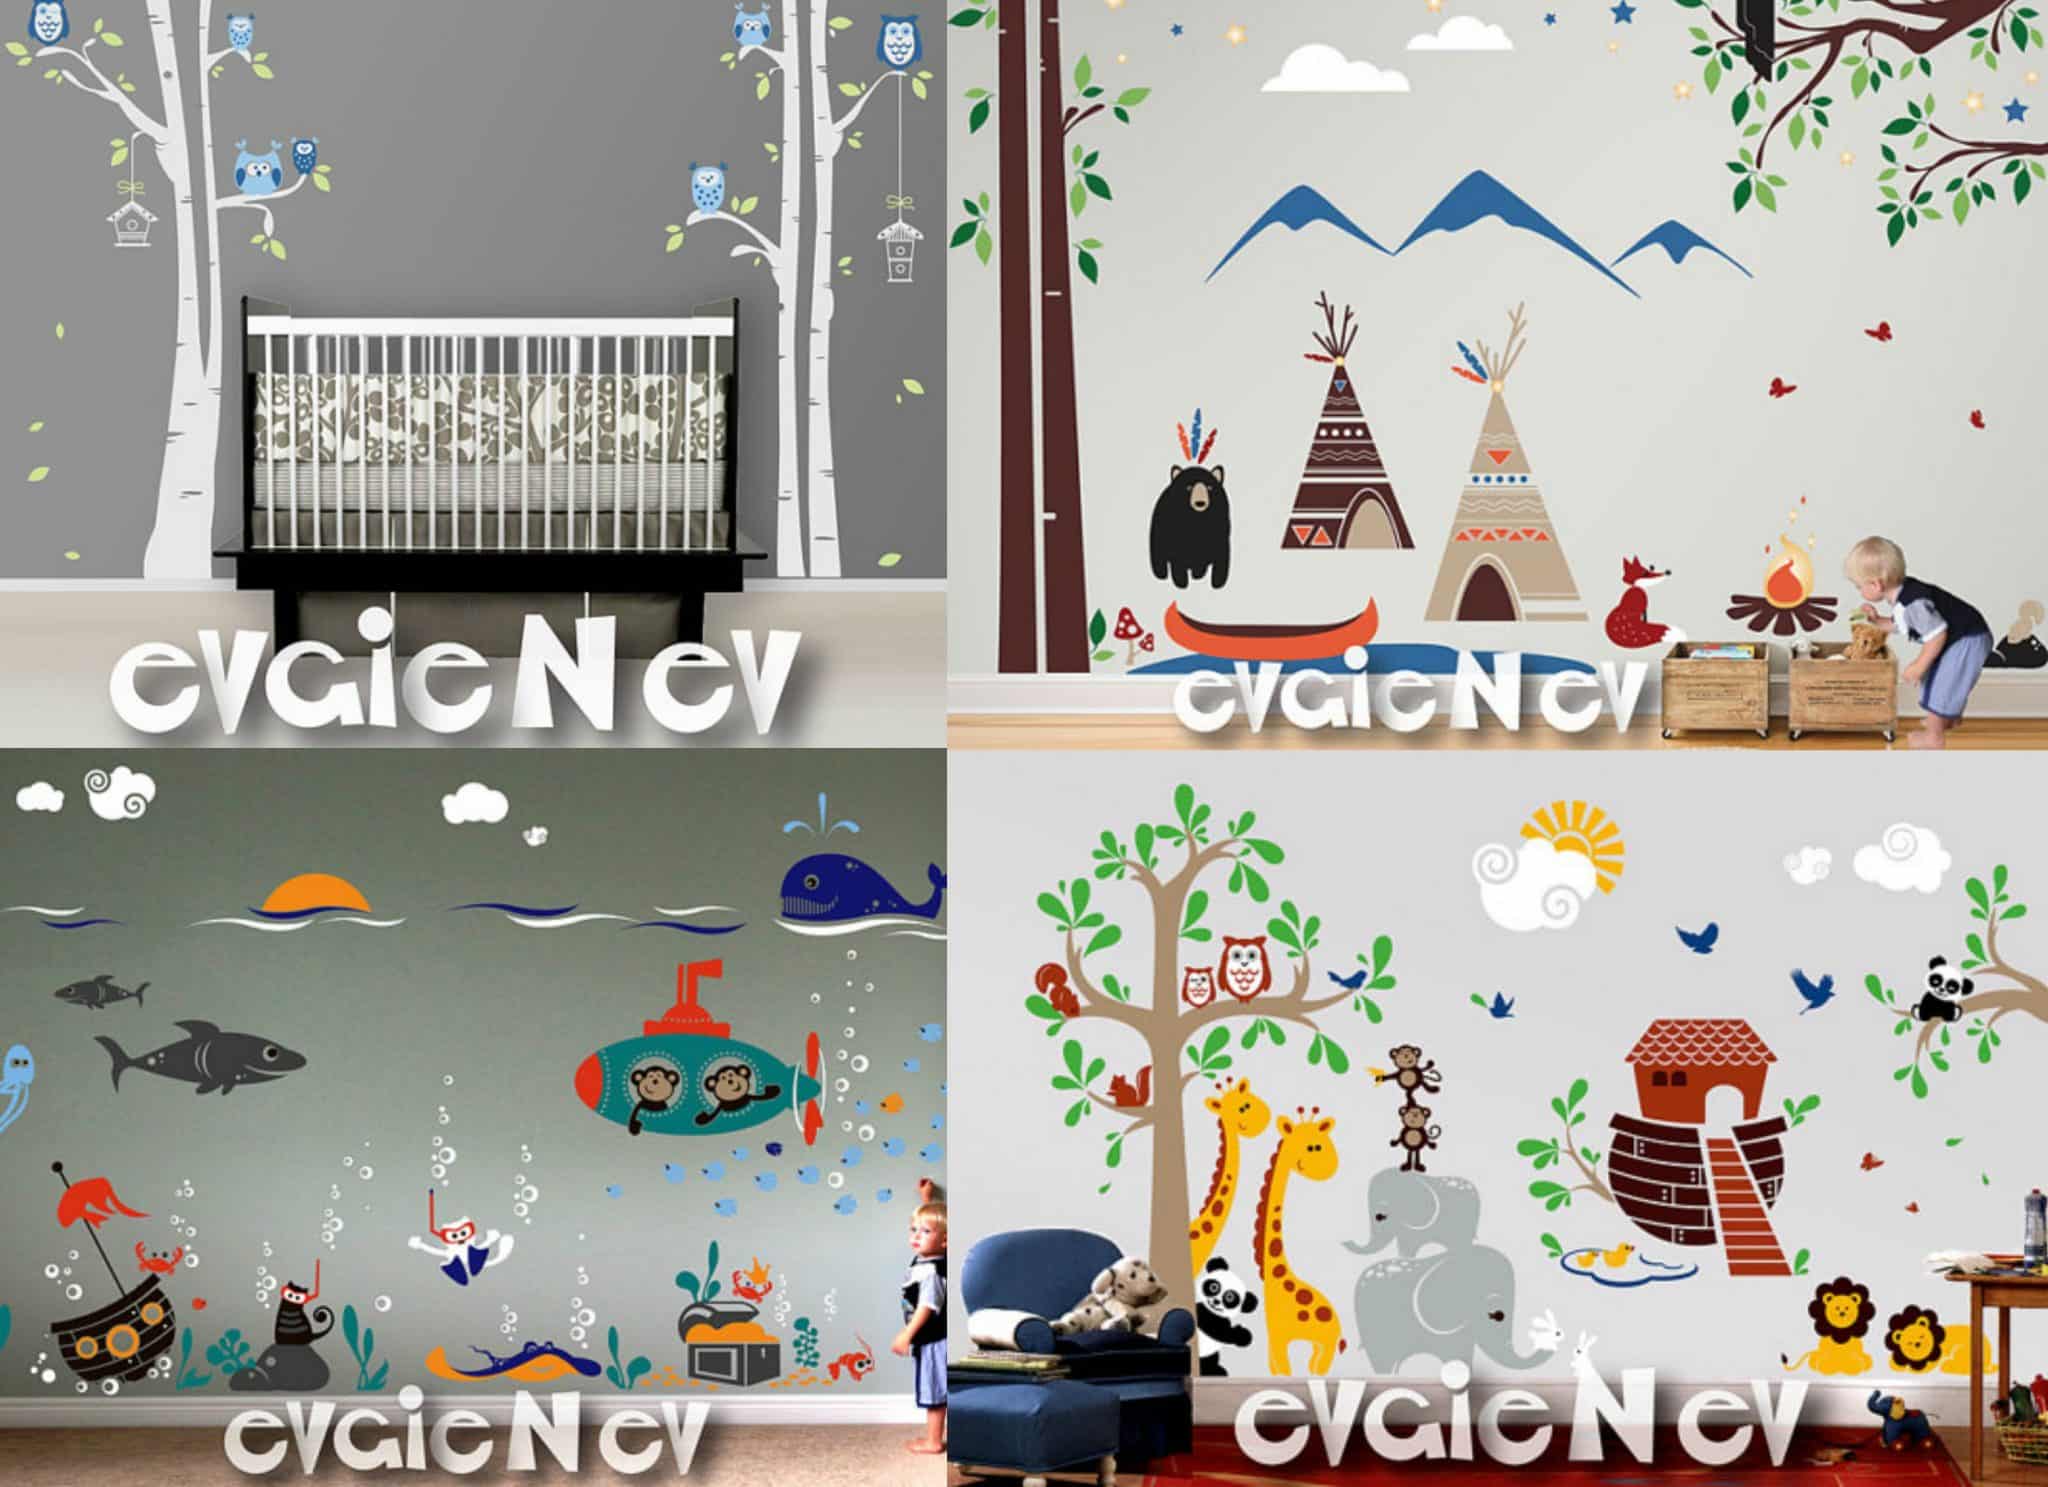 Win a Nursery Makeover from EvgieNev Wall Decals! Ends 9/29 @evgie #WallDecals #baby